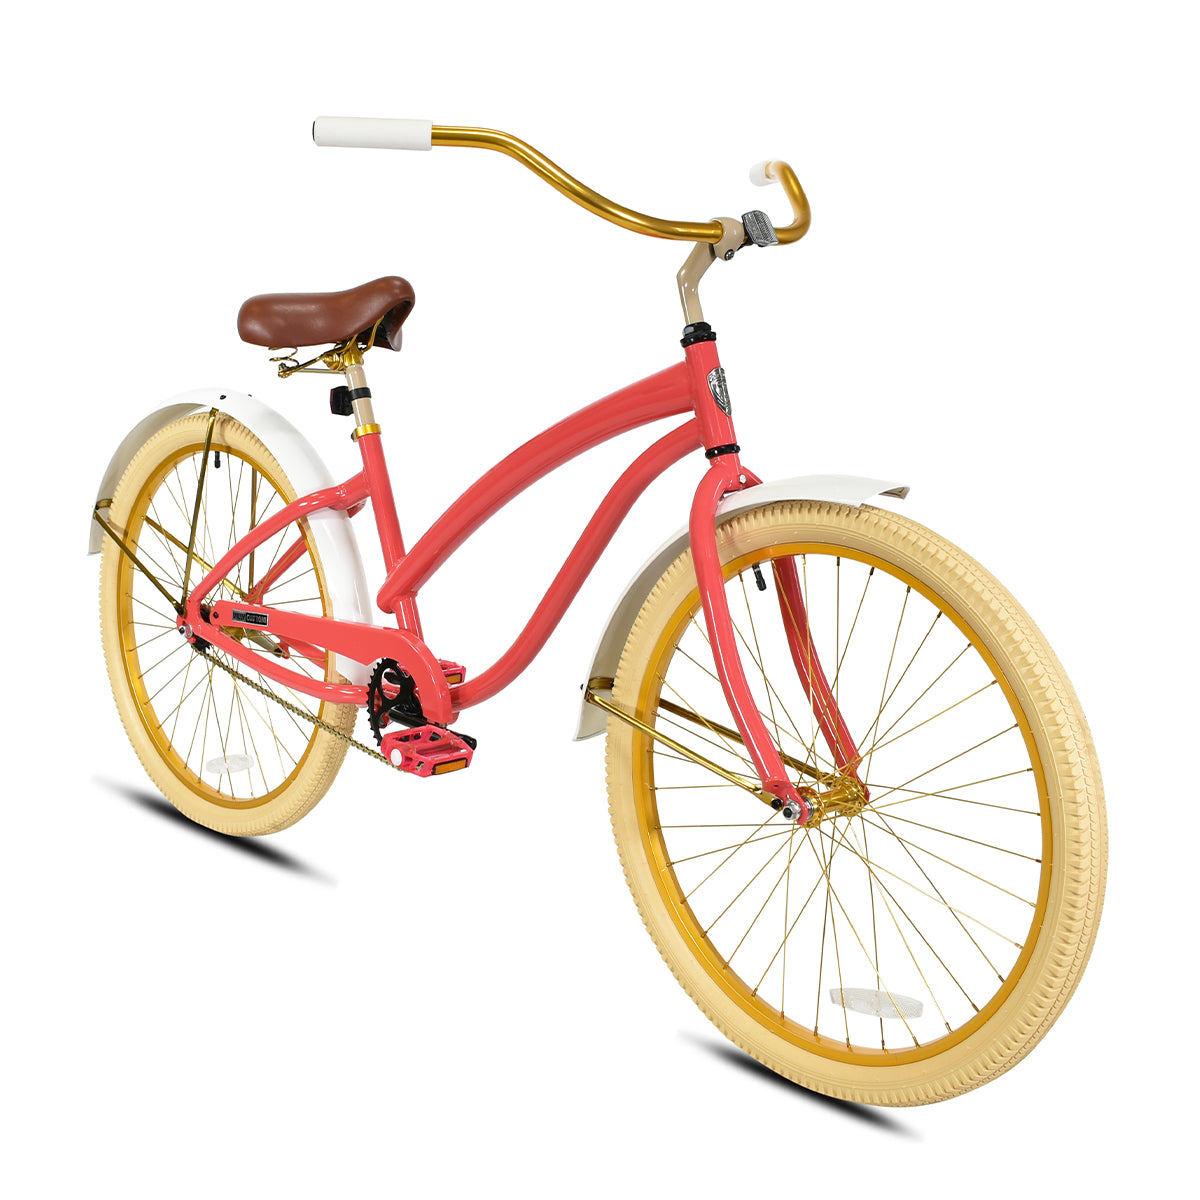 Dolly Single-Speed Cruiser with Coral Pink Step-Thru Frame and Pedals with White Fenders and Grips, Gold Wheels, Fender Braces, Handlebar, and Chain, and Cream Tires and Latte Posts along with a Brown Saddle